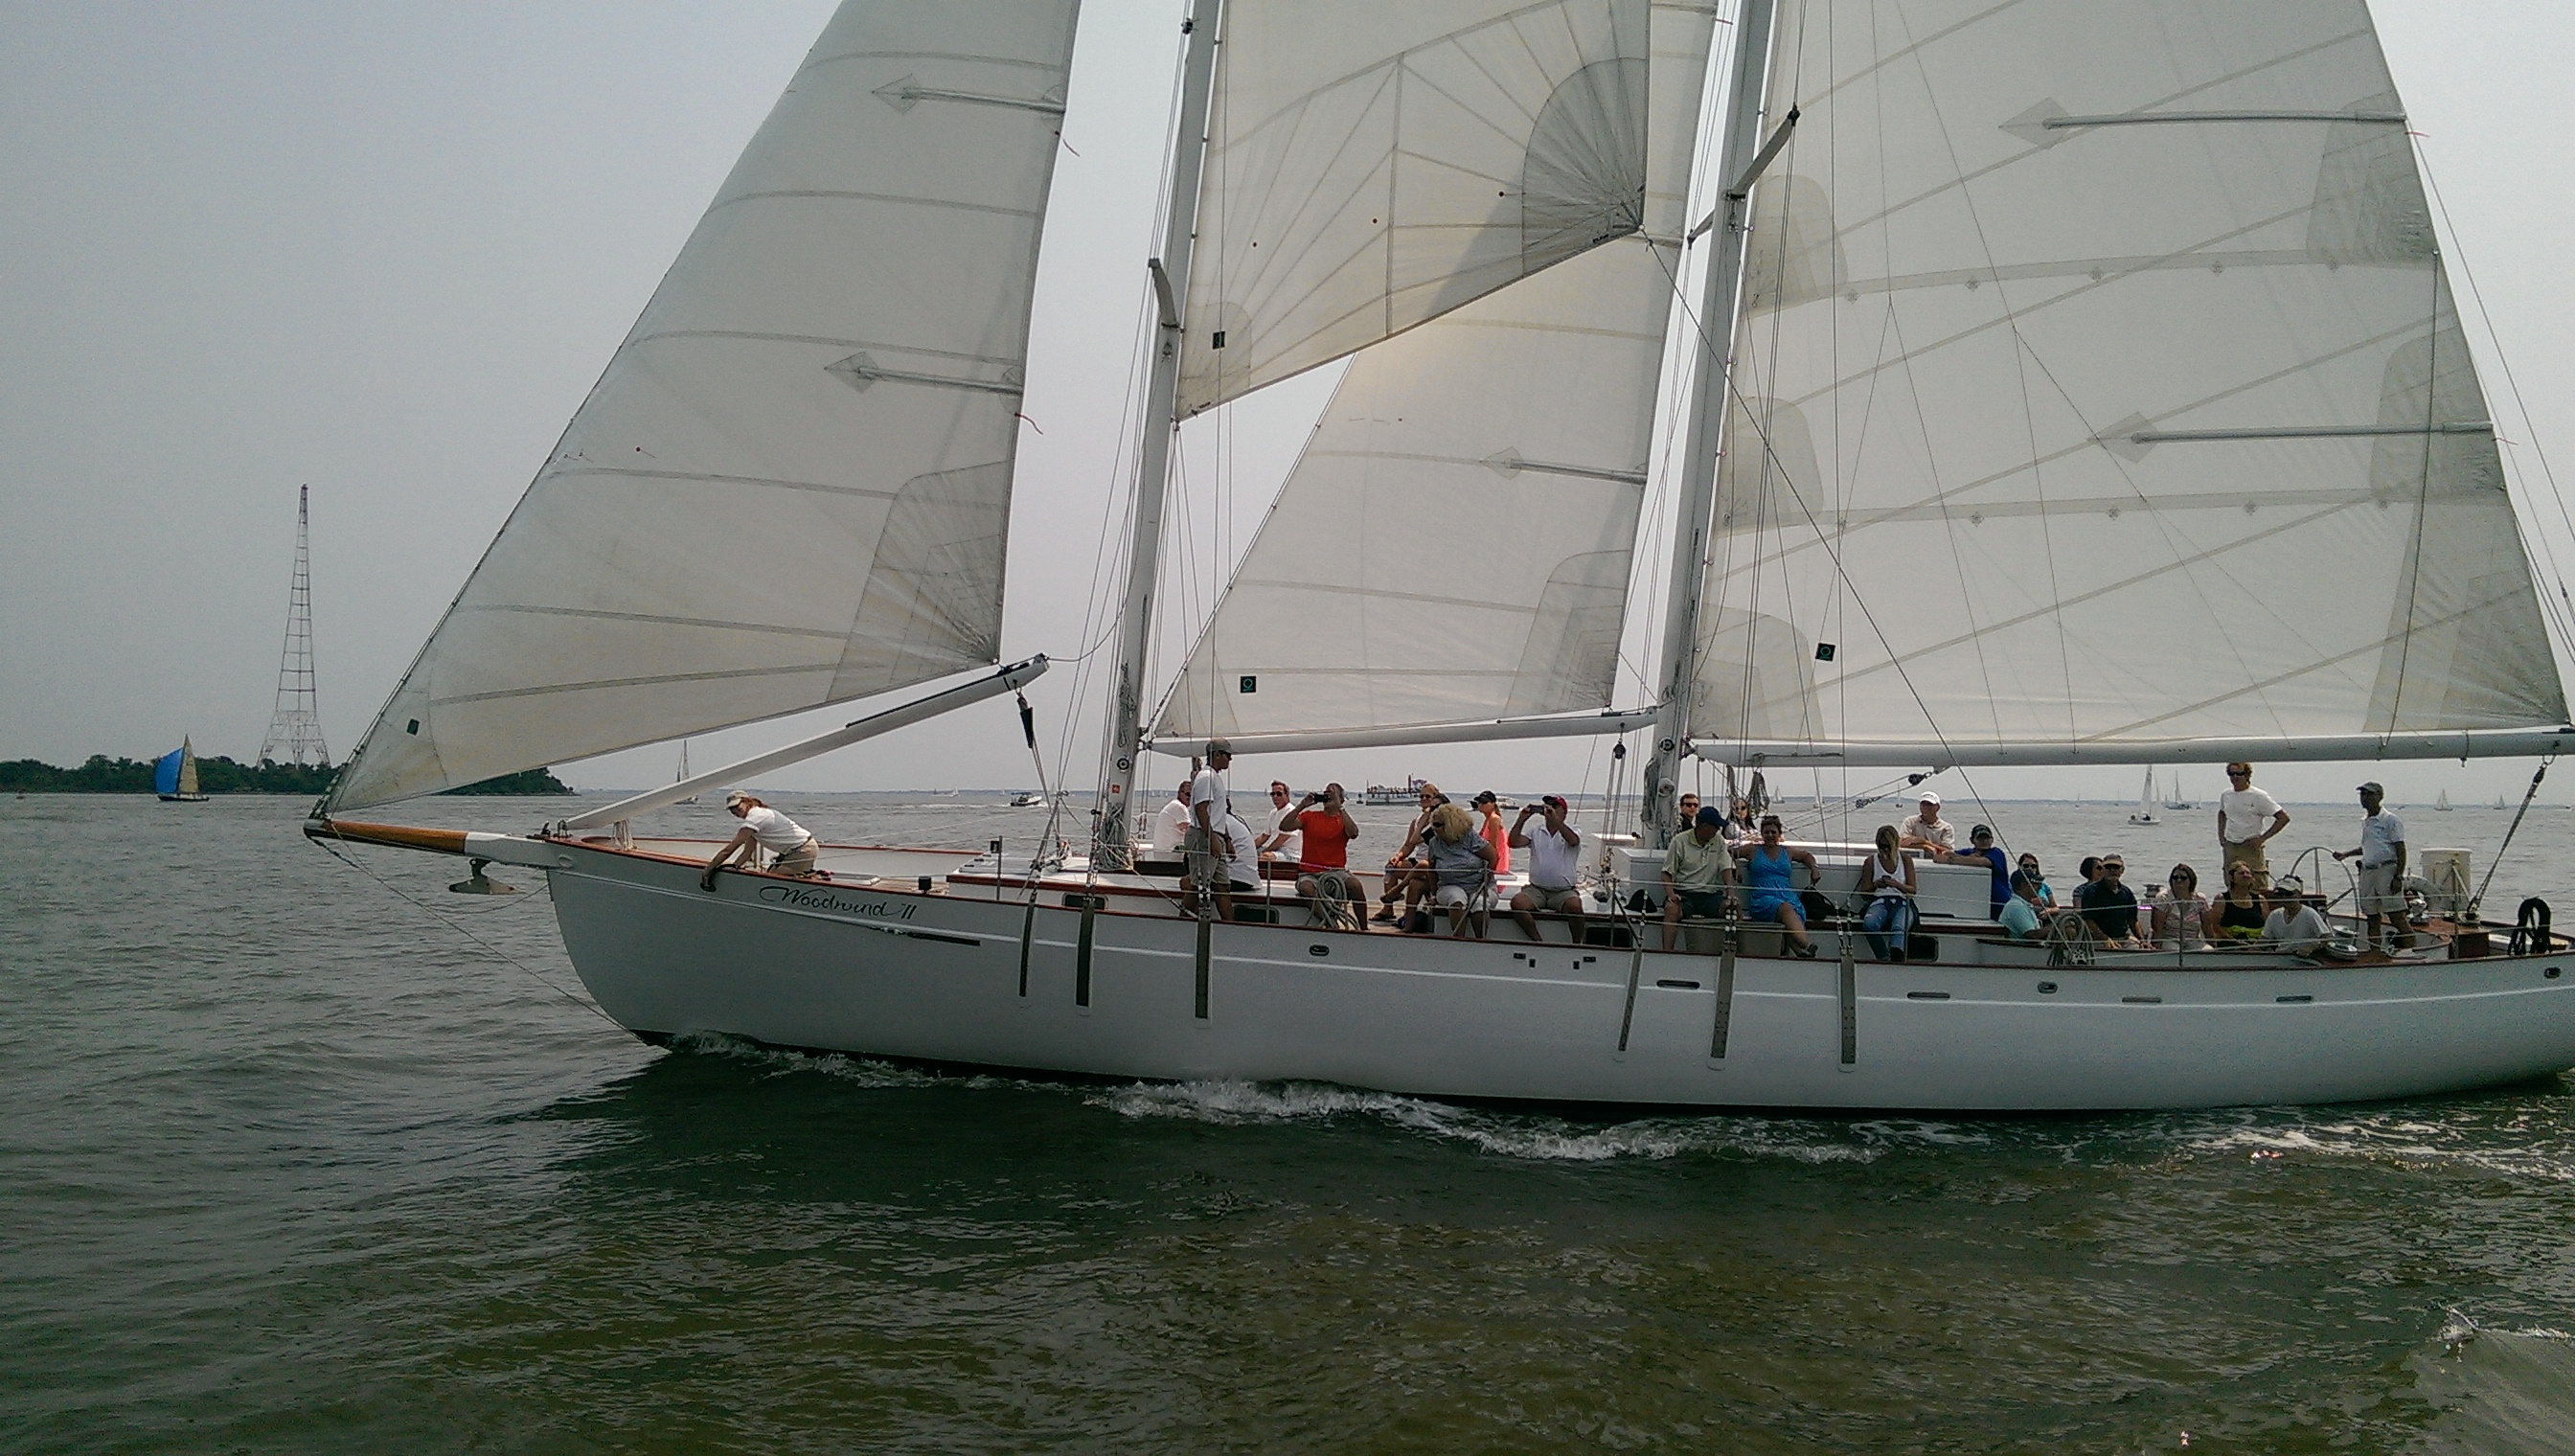 Guests waving as they sail by on the schooner